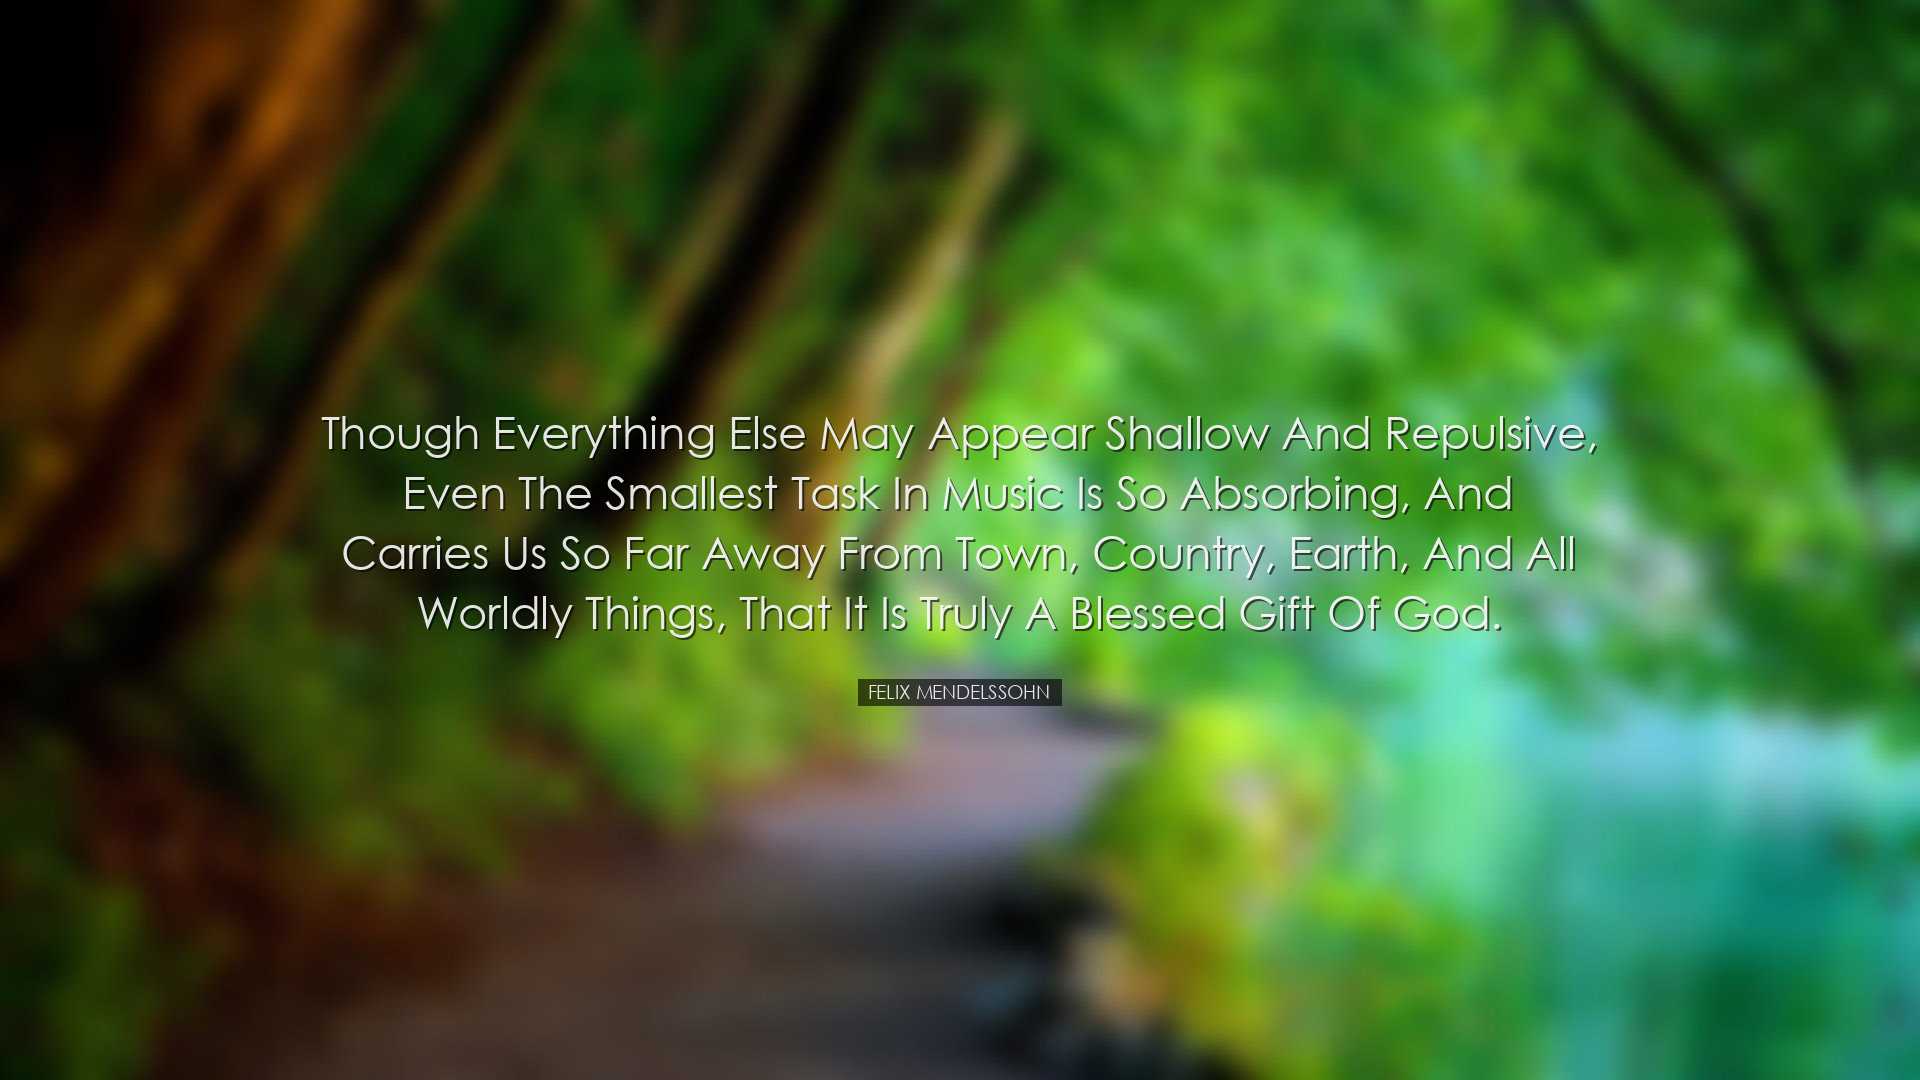 Though everything else may appear shallow and repulsive, even the